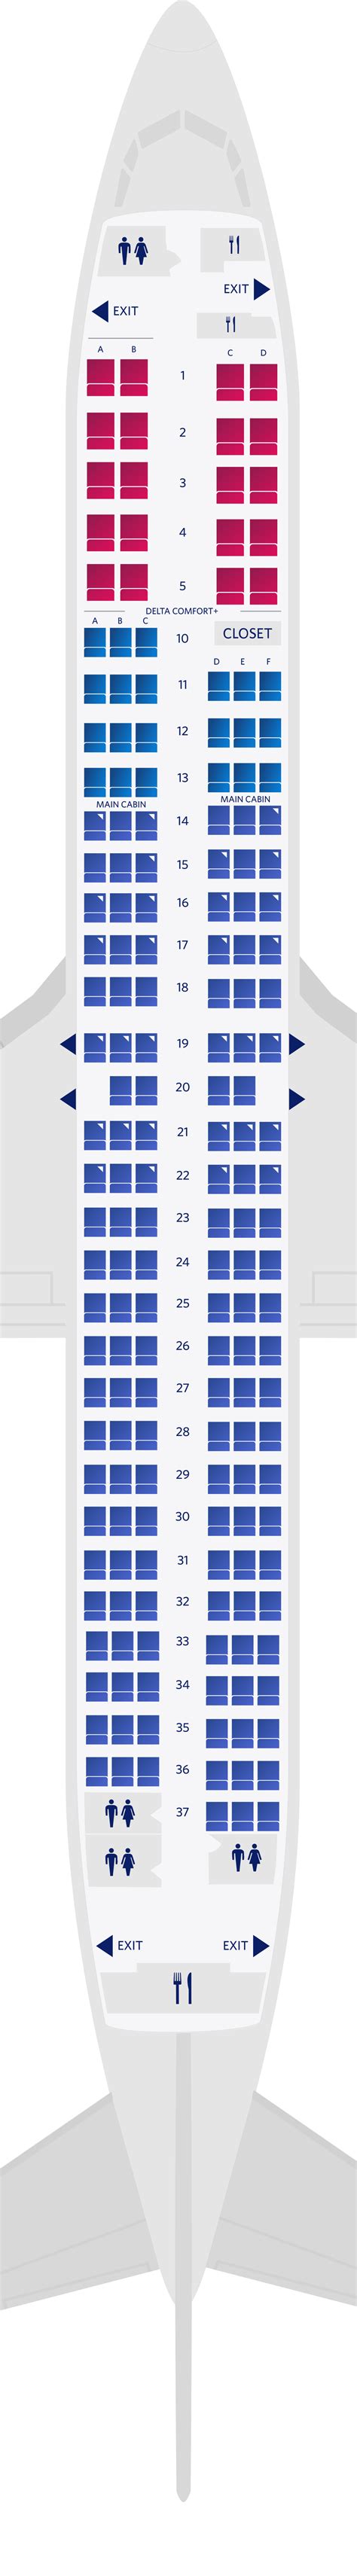 Singapore Airlines Boeing 737 aircraft seat map. Singapore Airlines operates the following models of Boeing, 737-800, 737 MAX 8. As of 2022, the company has nine 737-800s, ten 737 MAX 8s in its fleet. The airline selected these aircraft because they are built with the latest technology and are among the most reliable aircraft in the world.. 